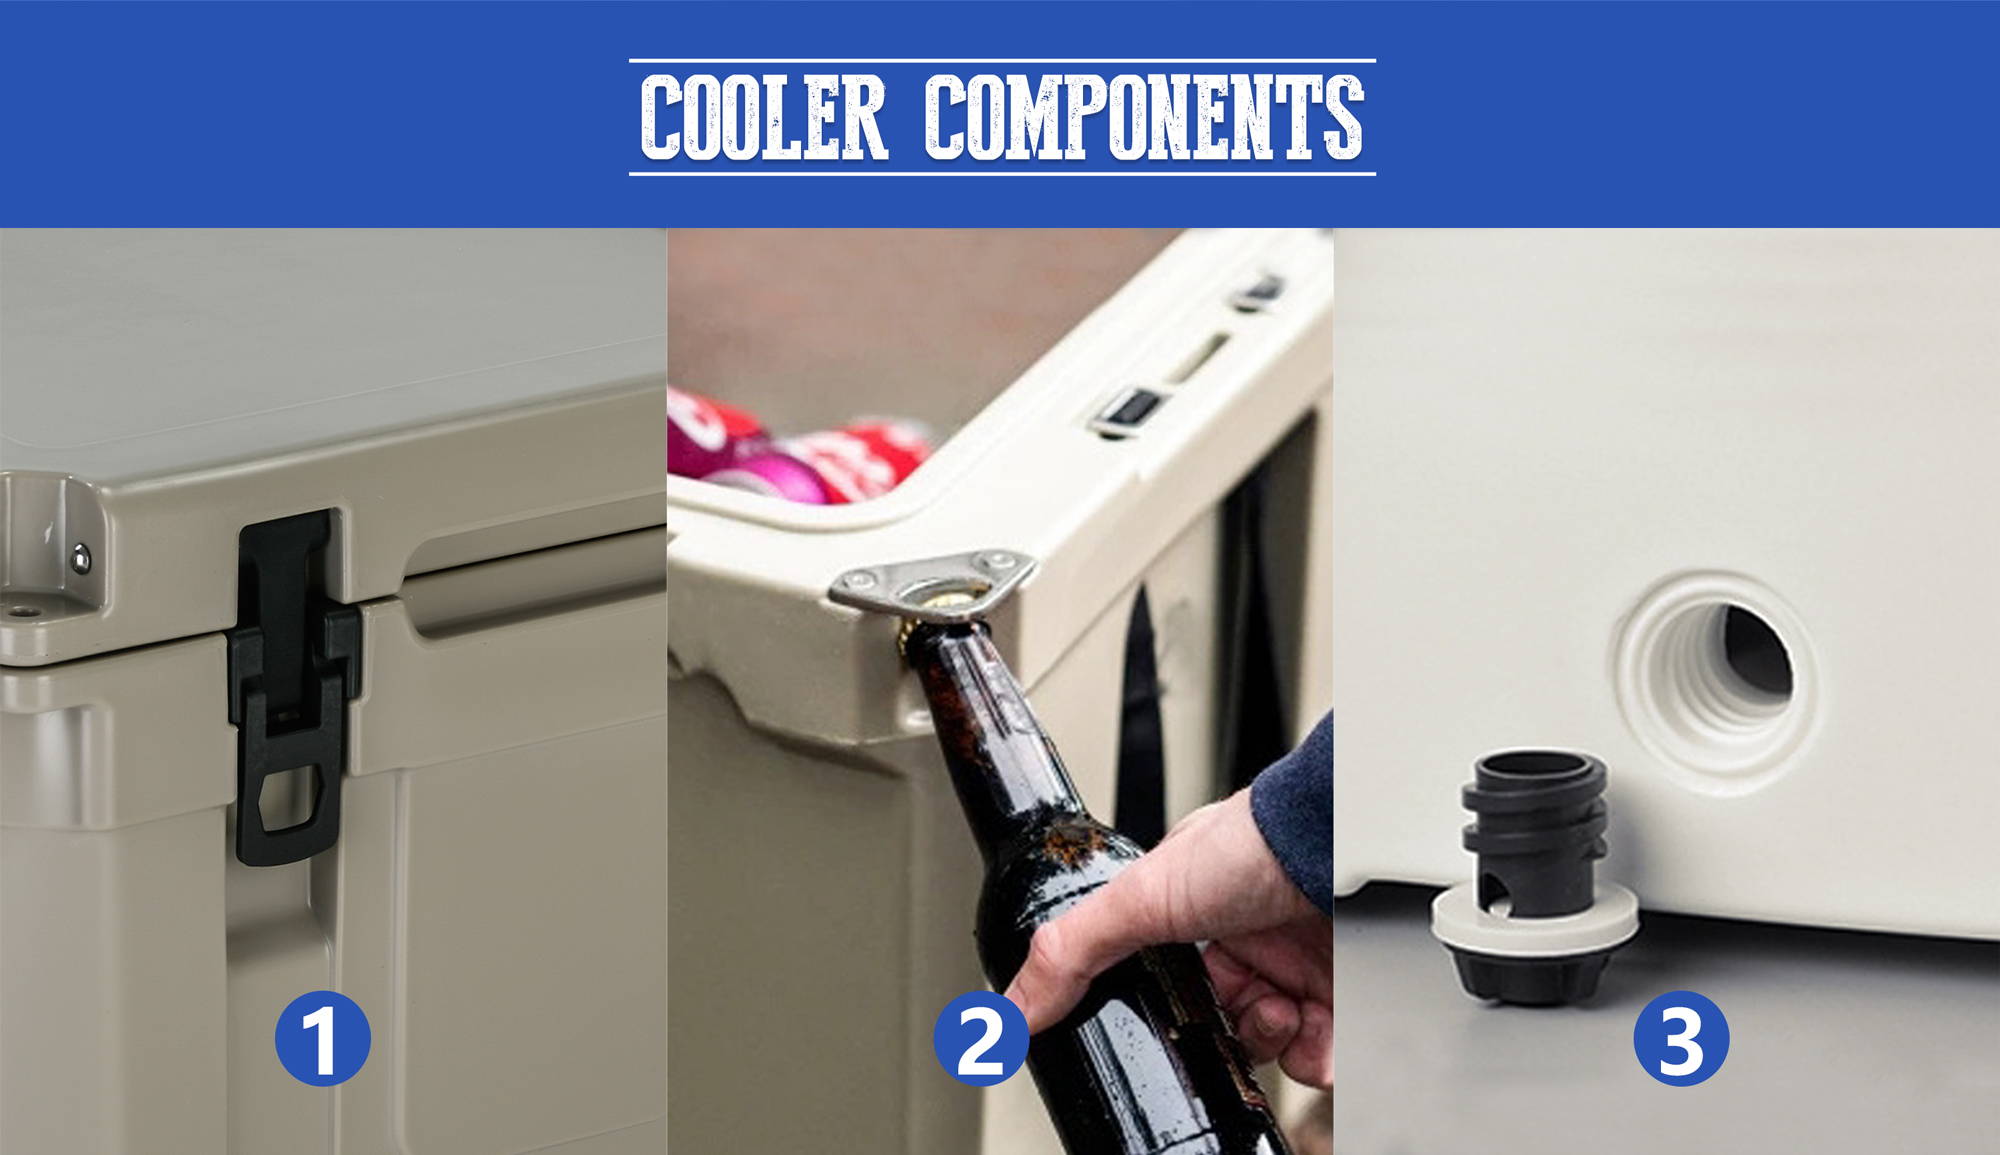 The picture shows several components of the cooler